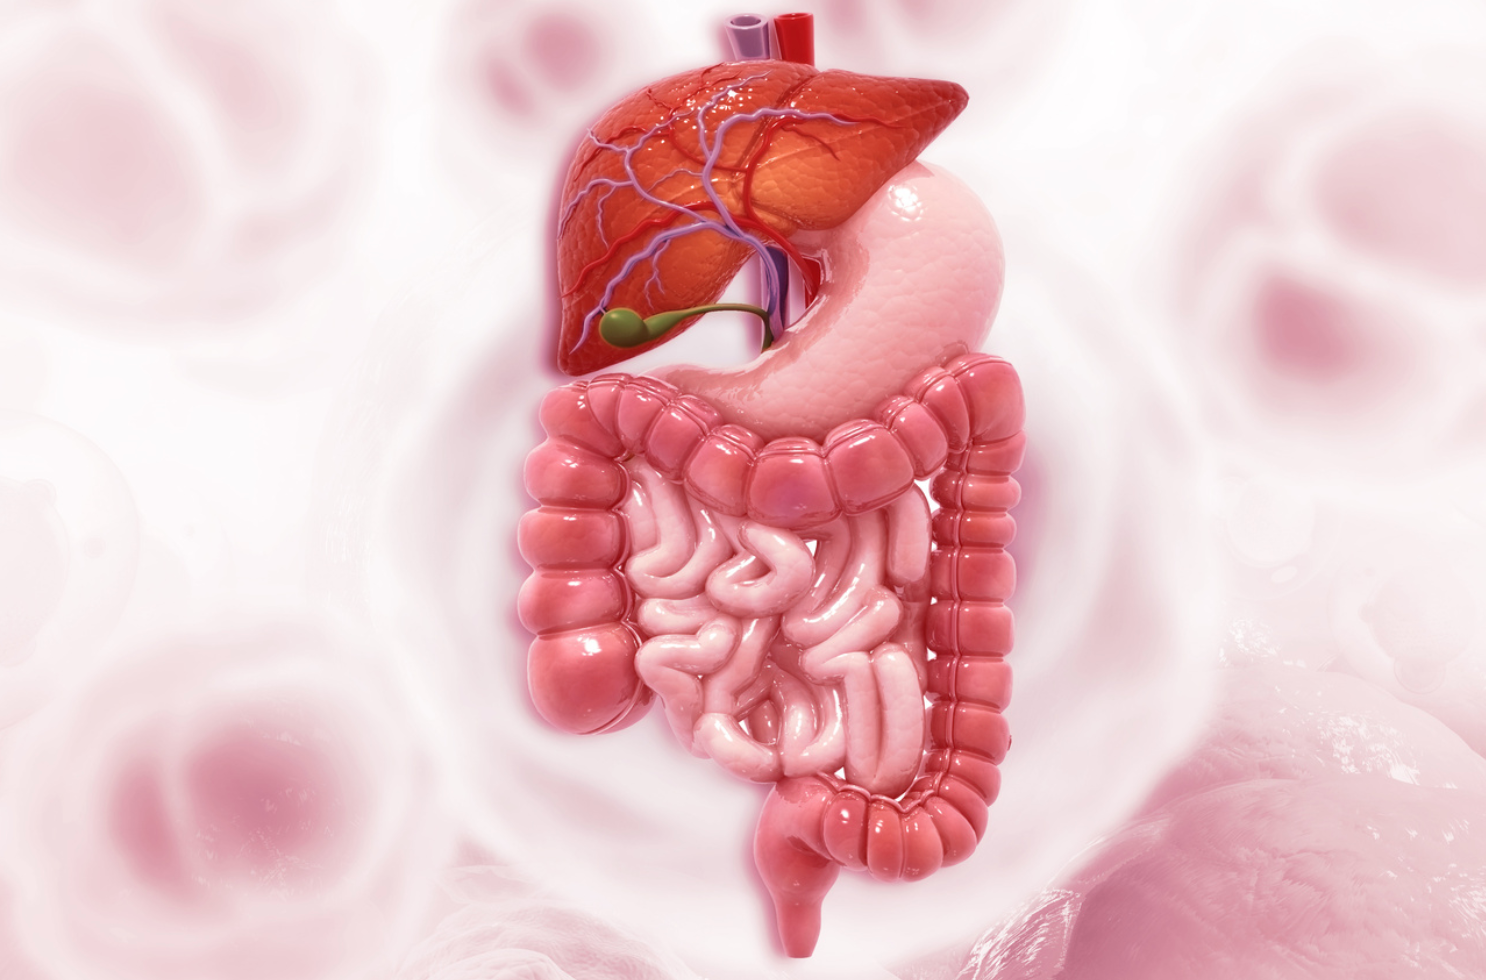 New Therapeutic Targets Could Treat Colon Tumors, Inflammatory Bowel Disease